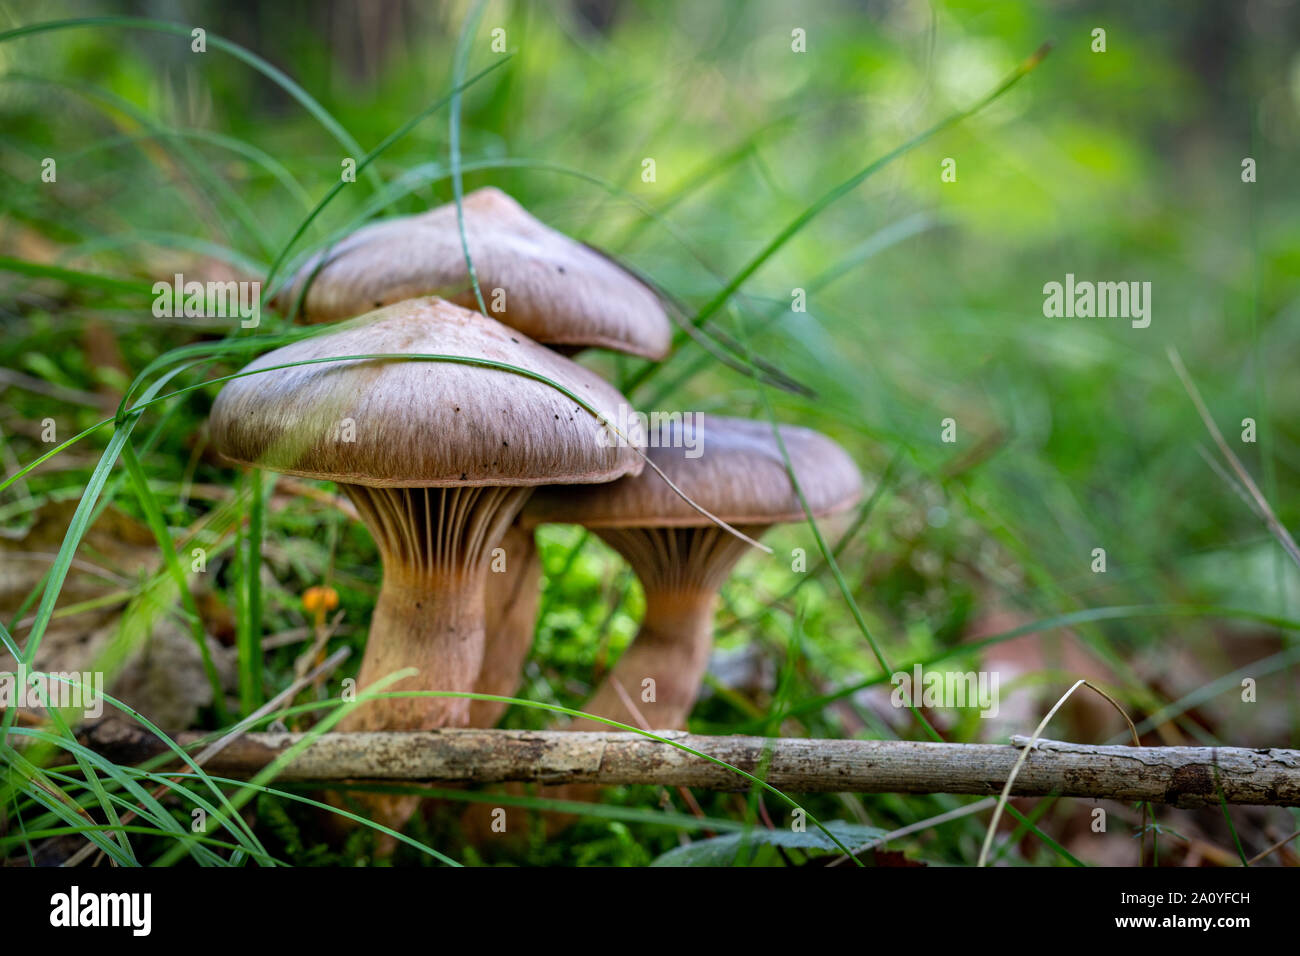 Poisonous mushroom growing in the forest. Inedible mushrooms growing in Central Europe. Autumn season. Stock Photo